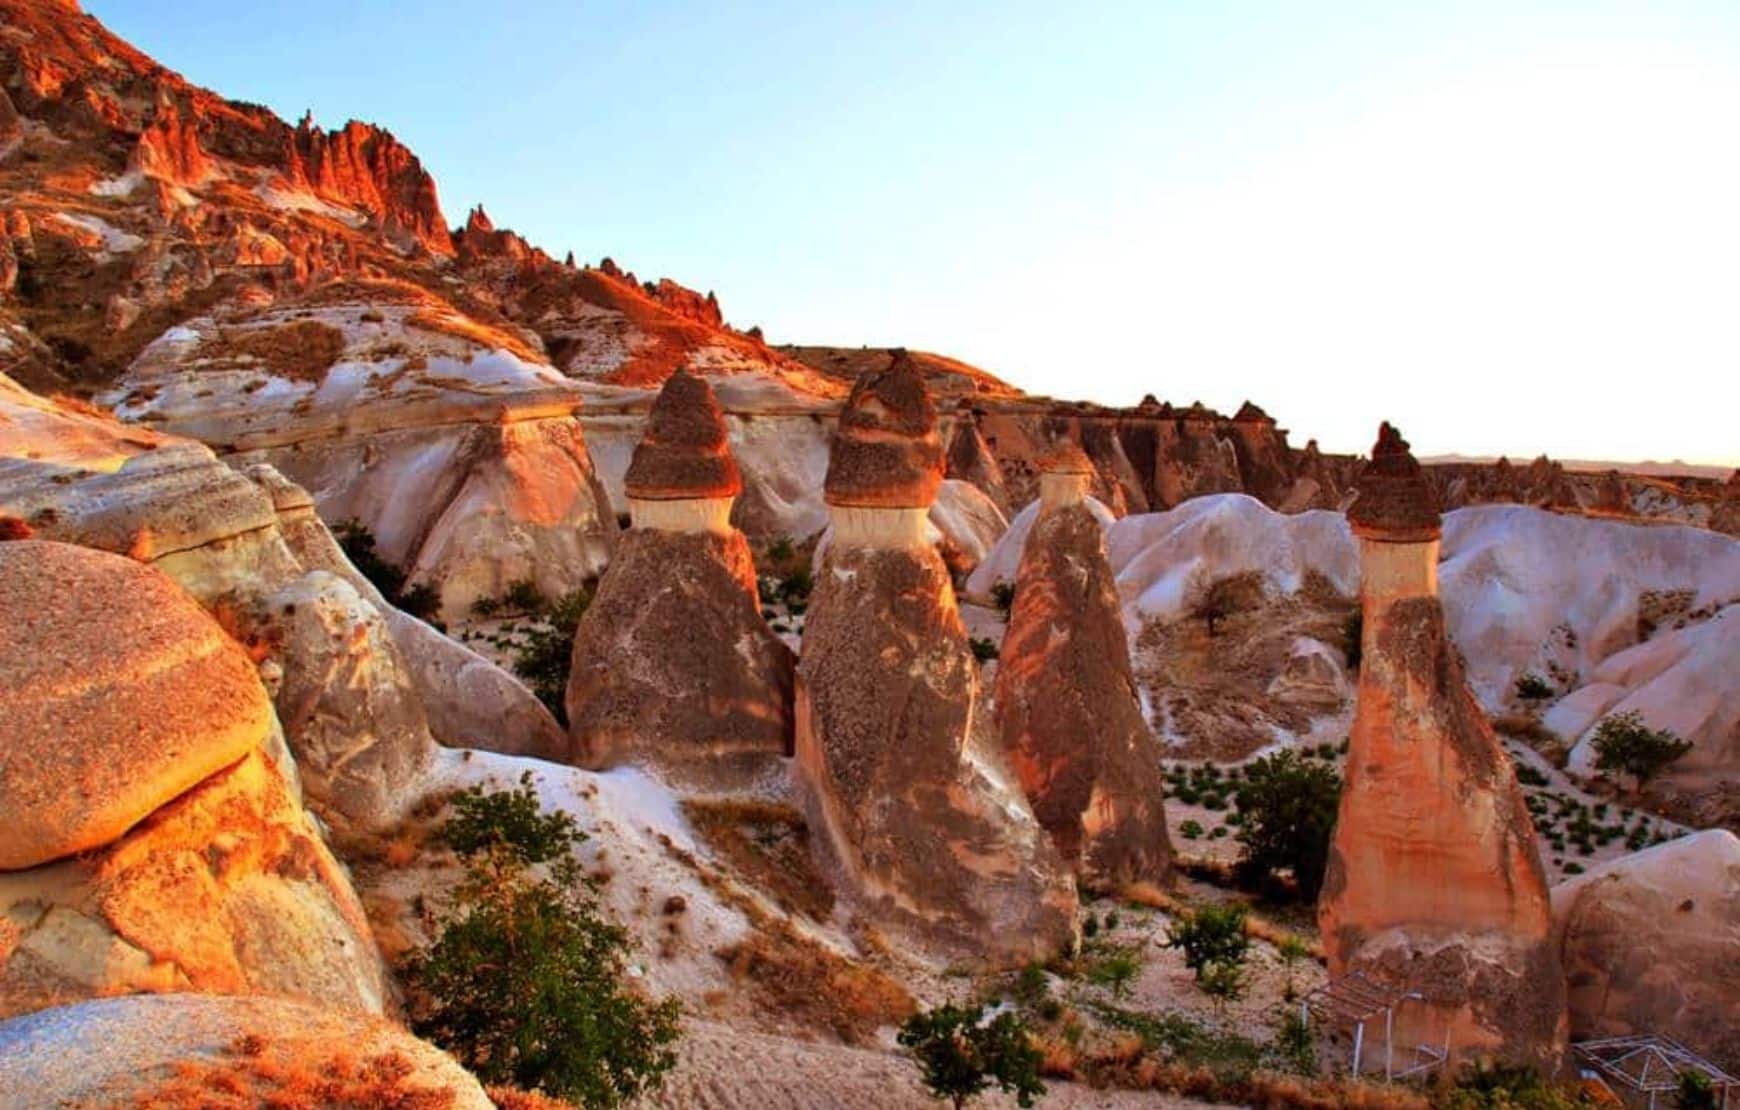 Visit Cappadocia Valley's with our Cappadocia Tour from Istanbul